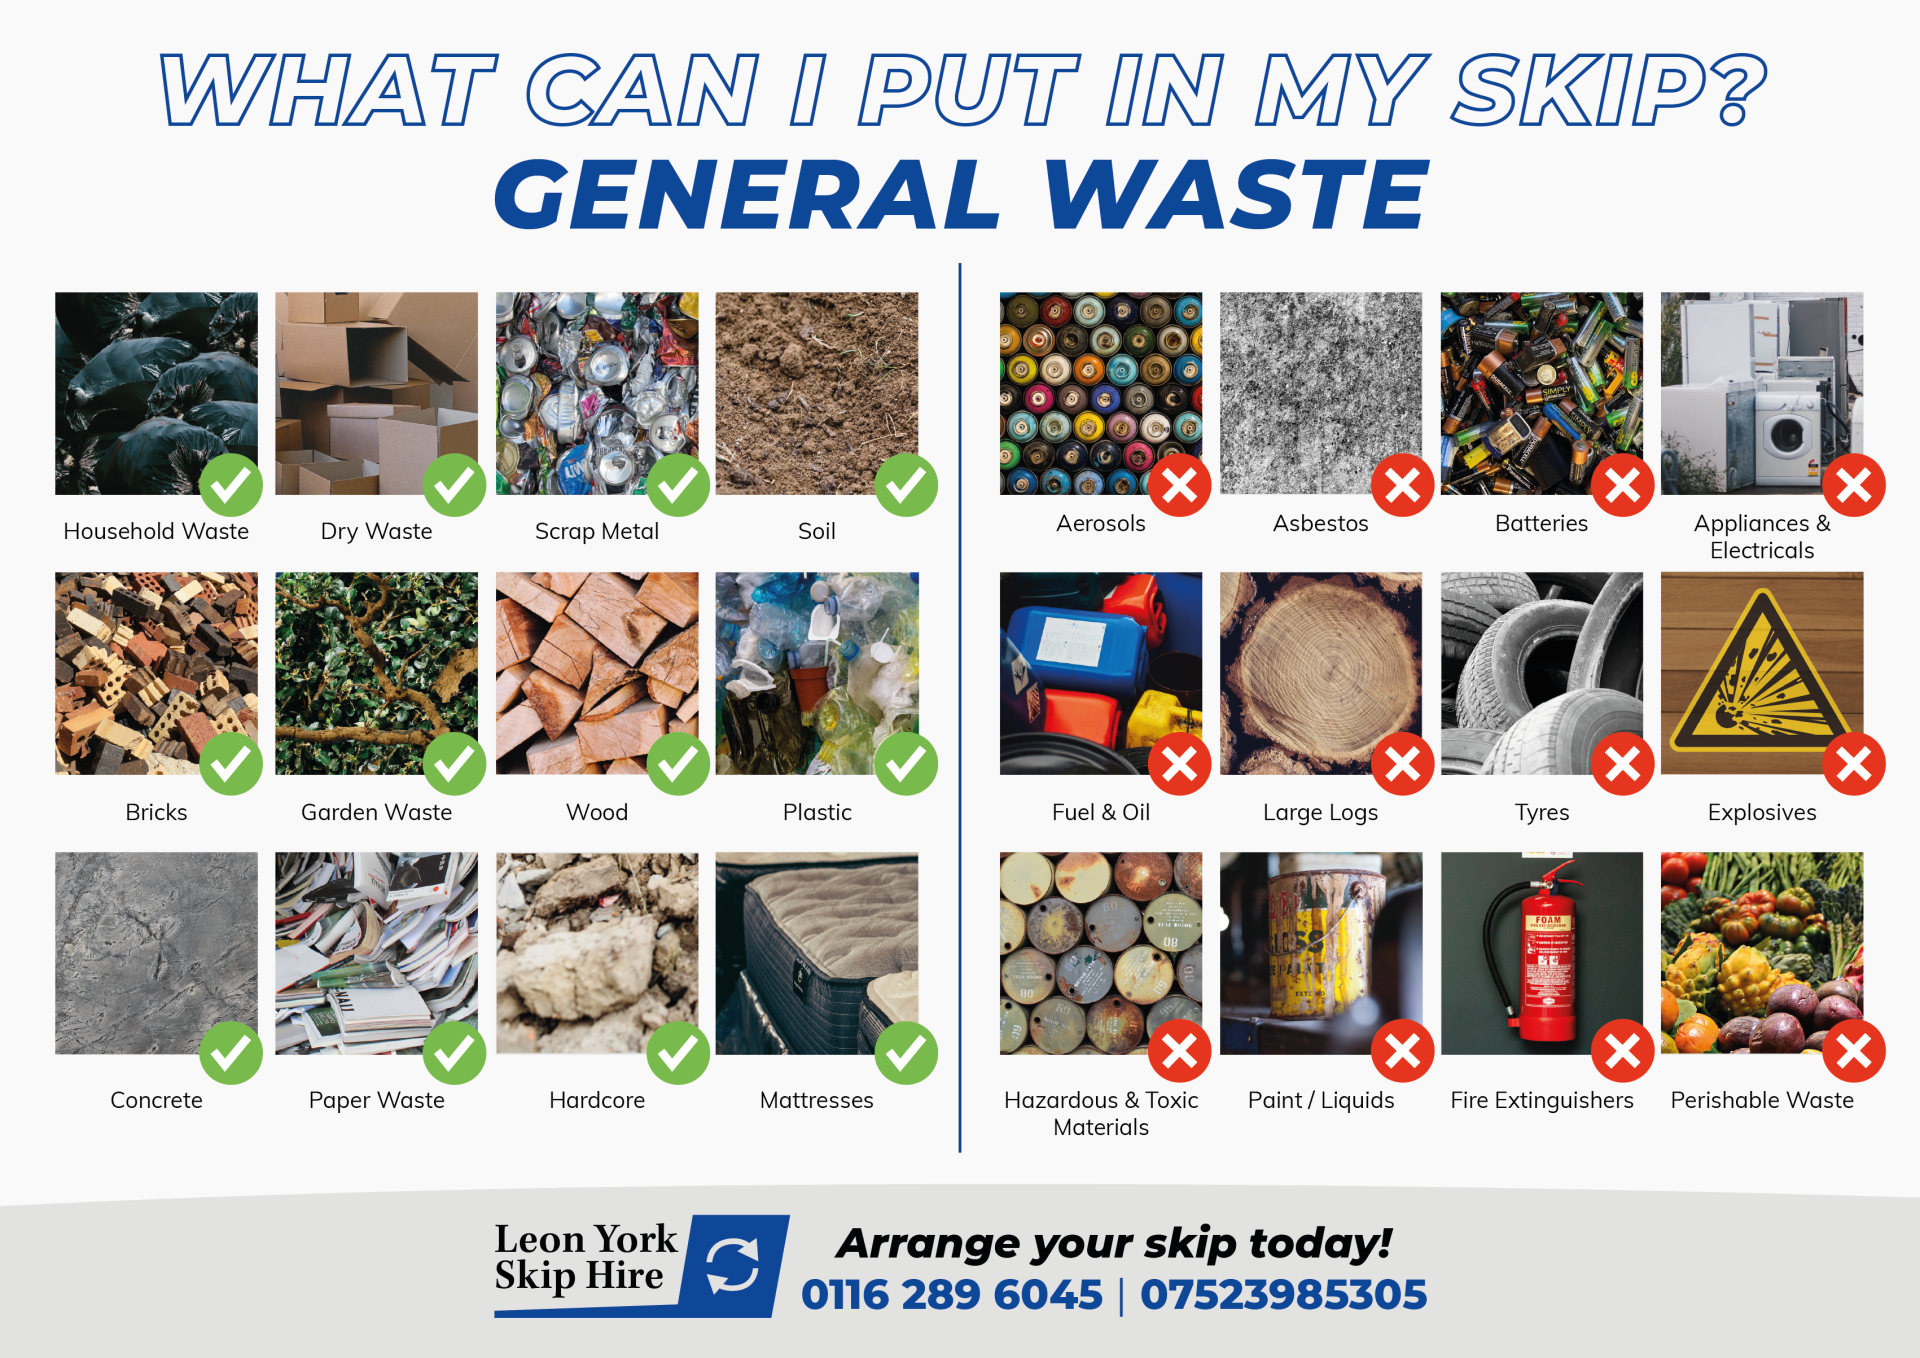 What can go in a general waste skip